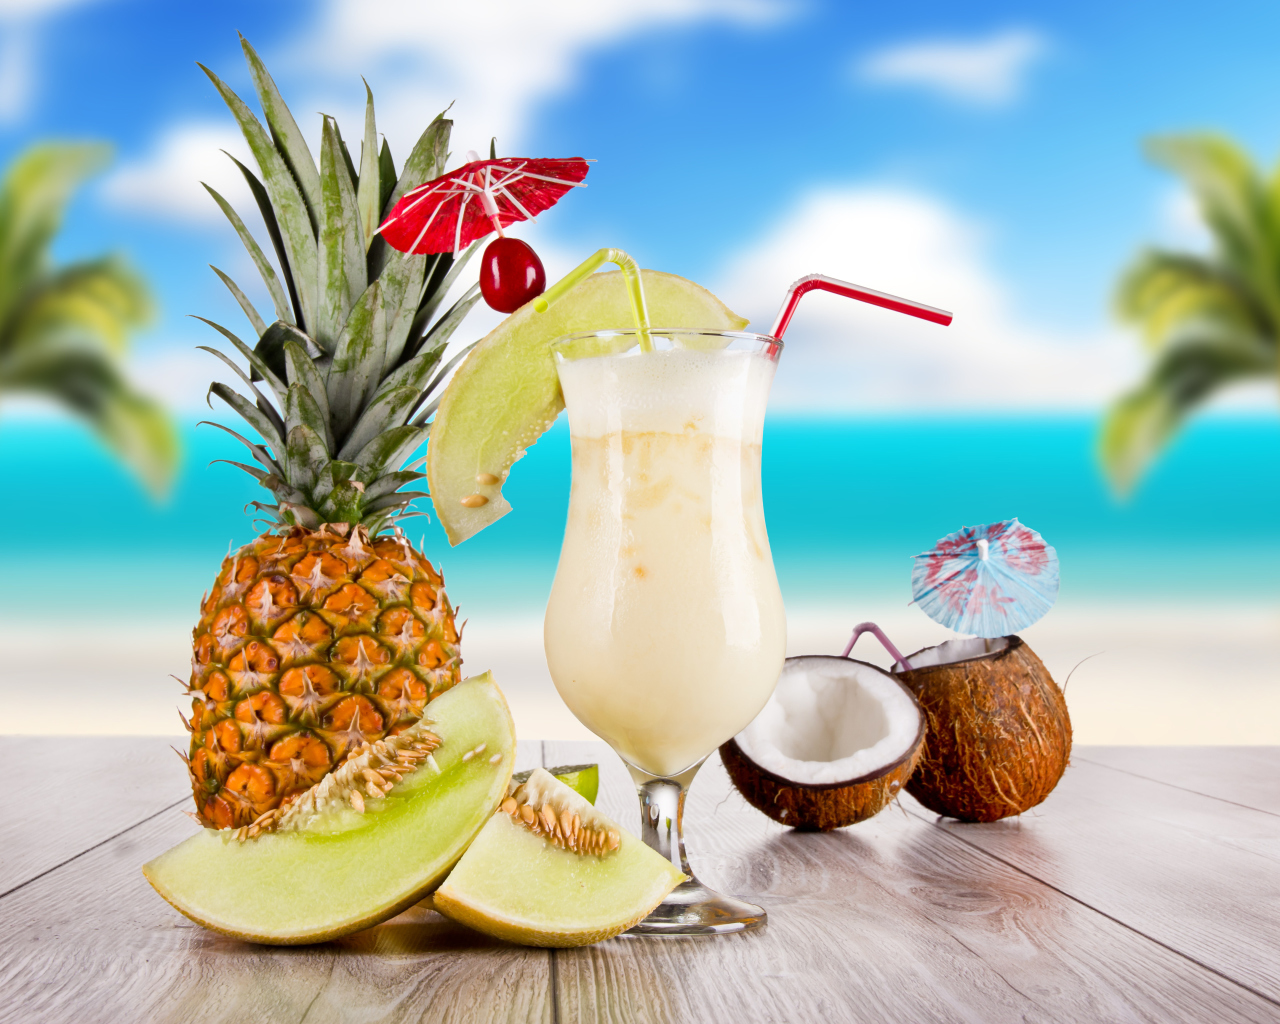 Coconut and Pineapple Cocktails wallpaper 1280x1024